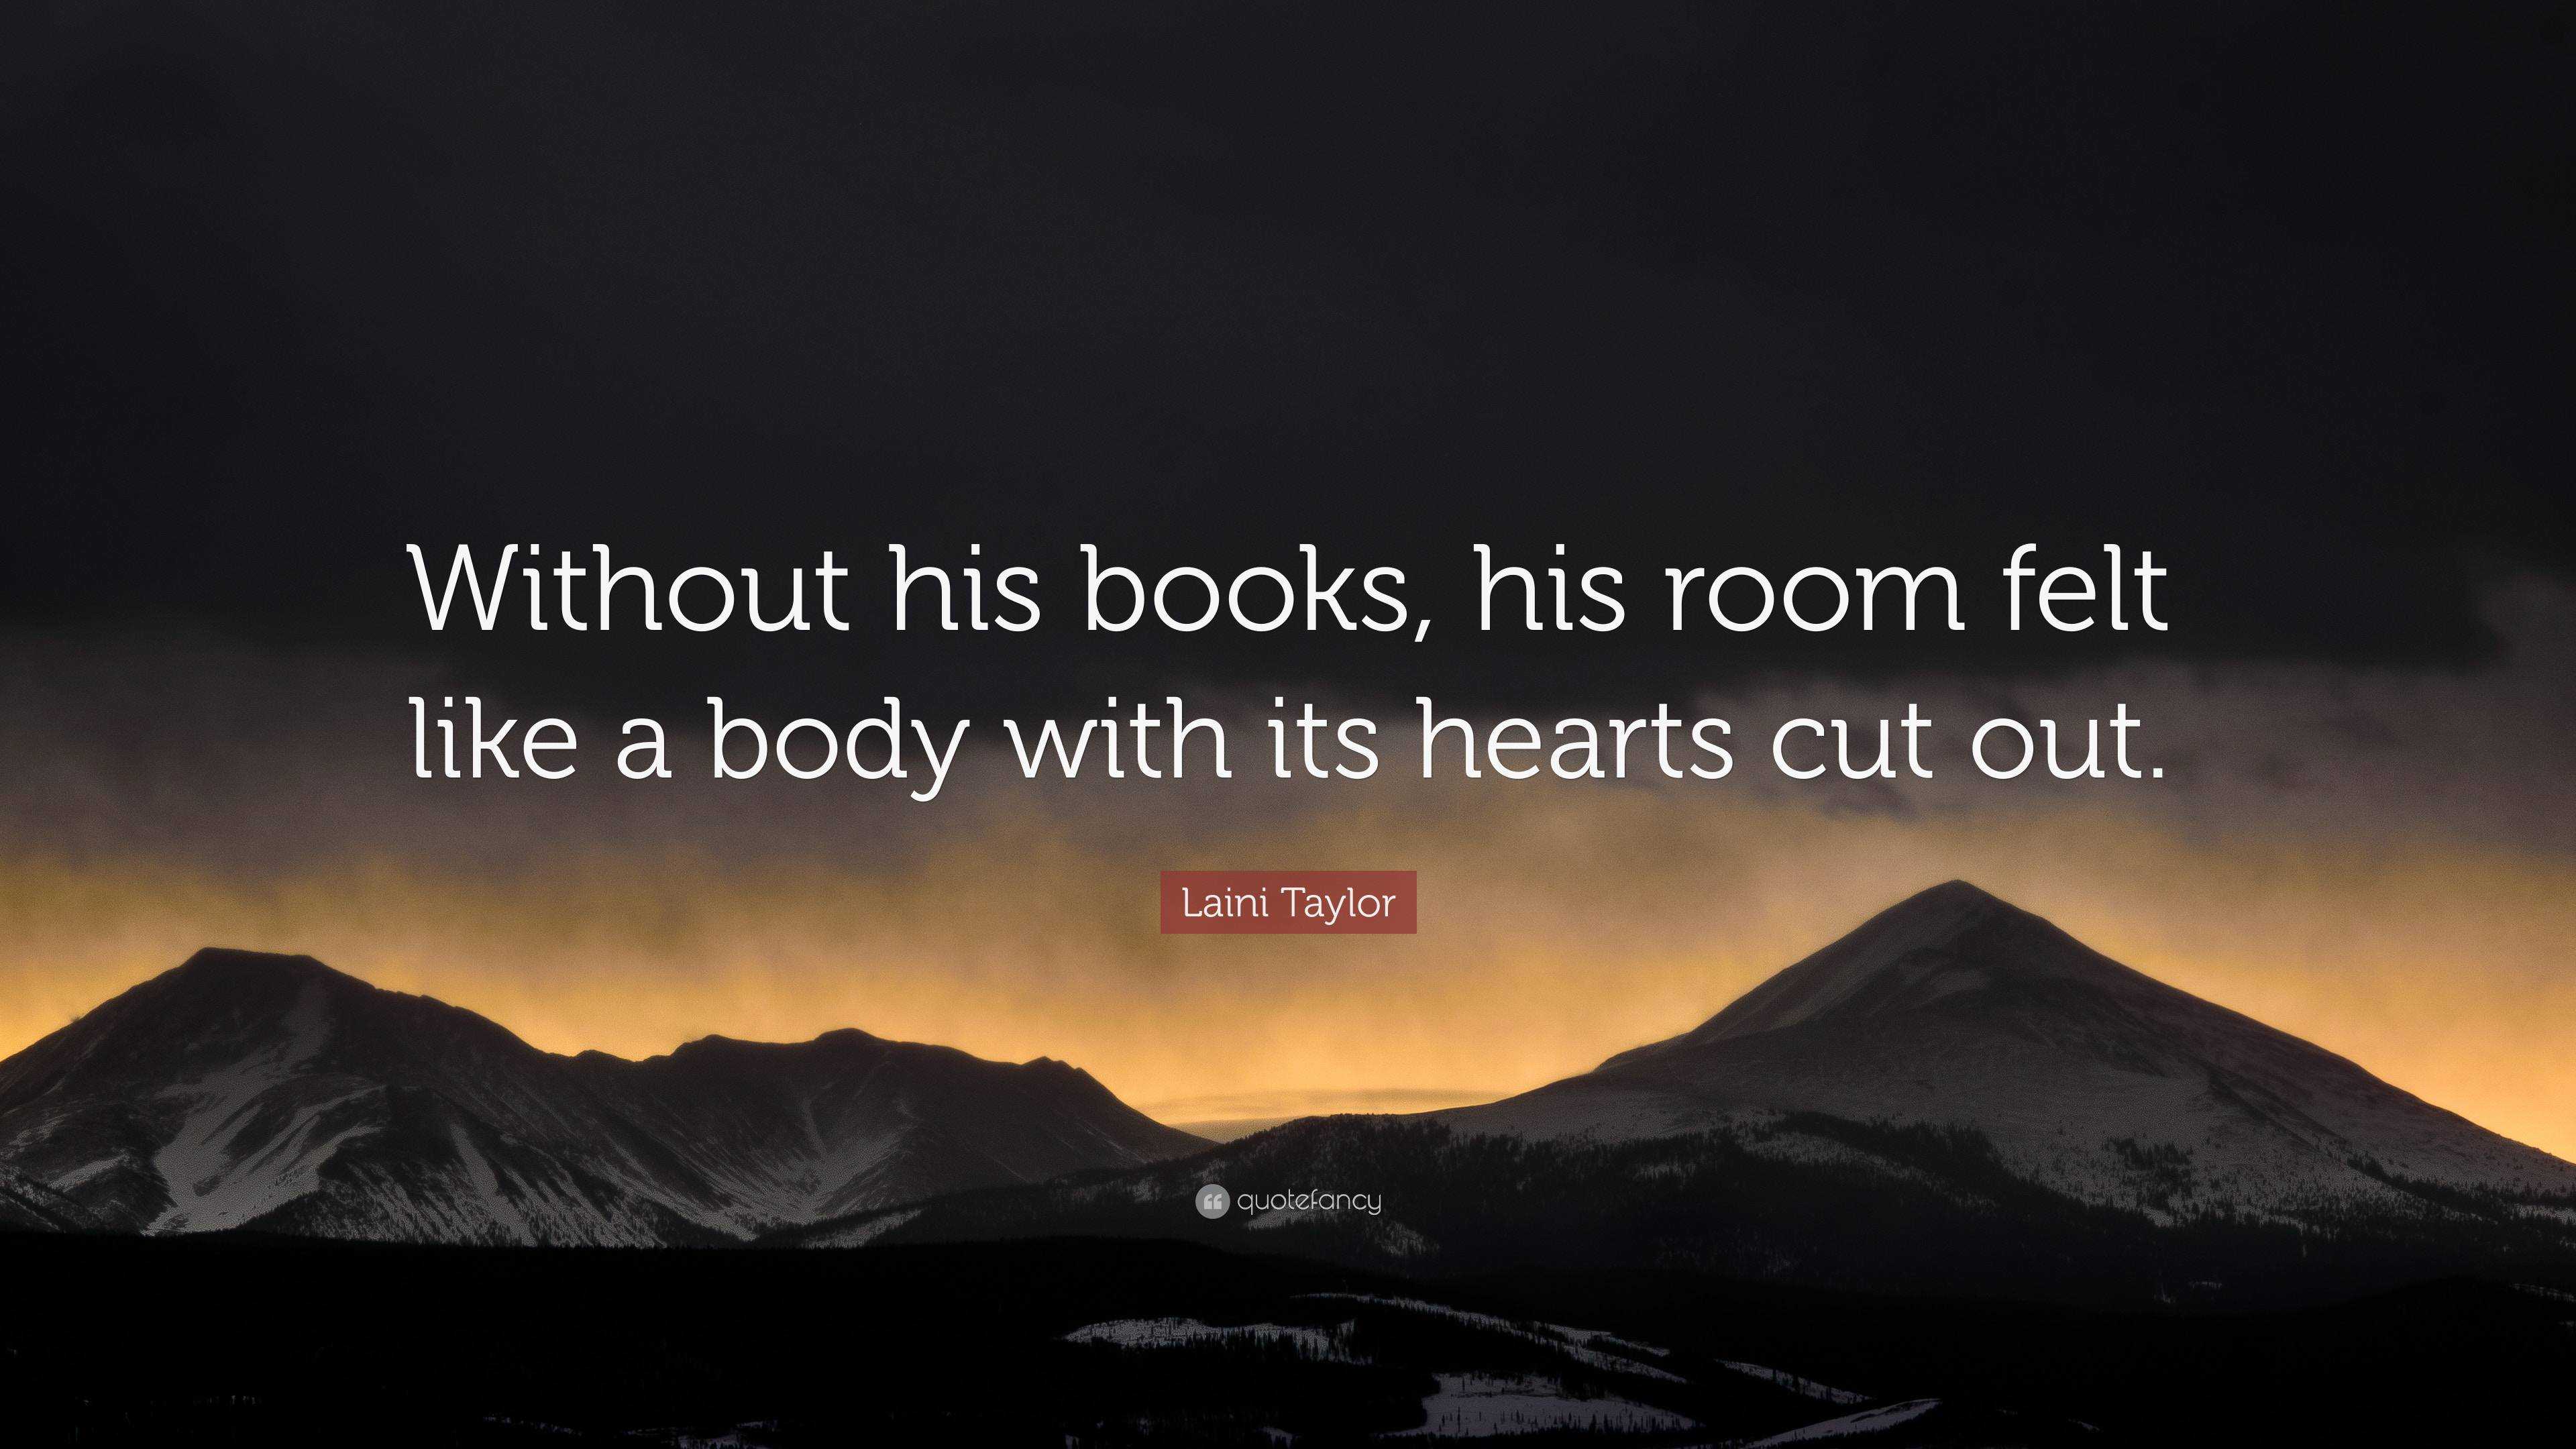 Laini Taylor Quote Without His Books His Room Felt Like A Body With Its Hearts Cut